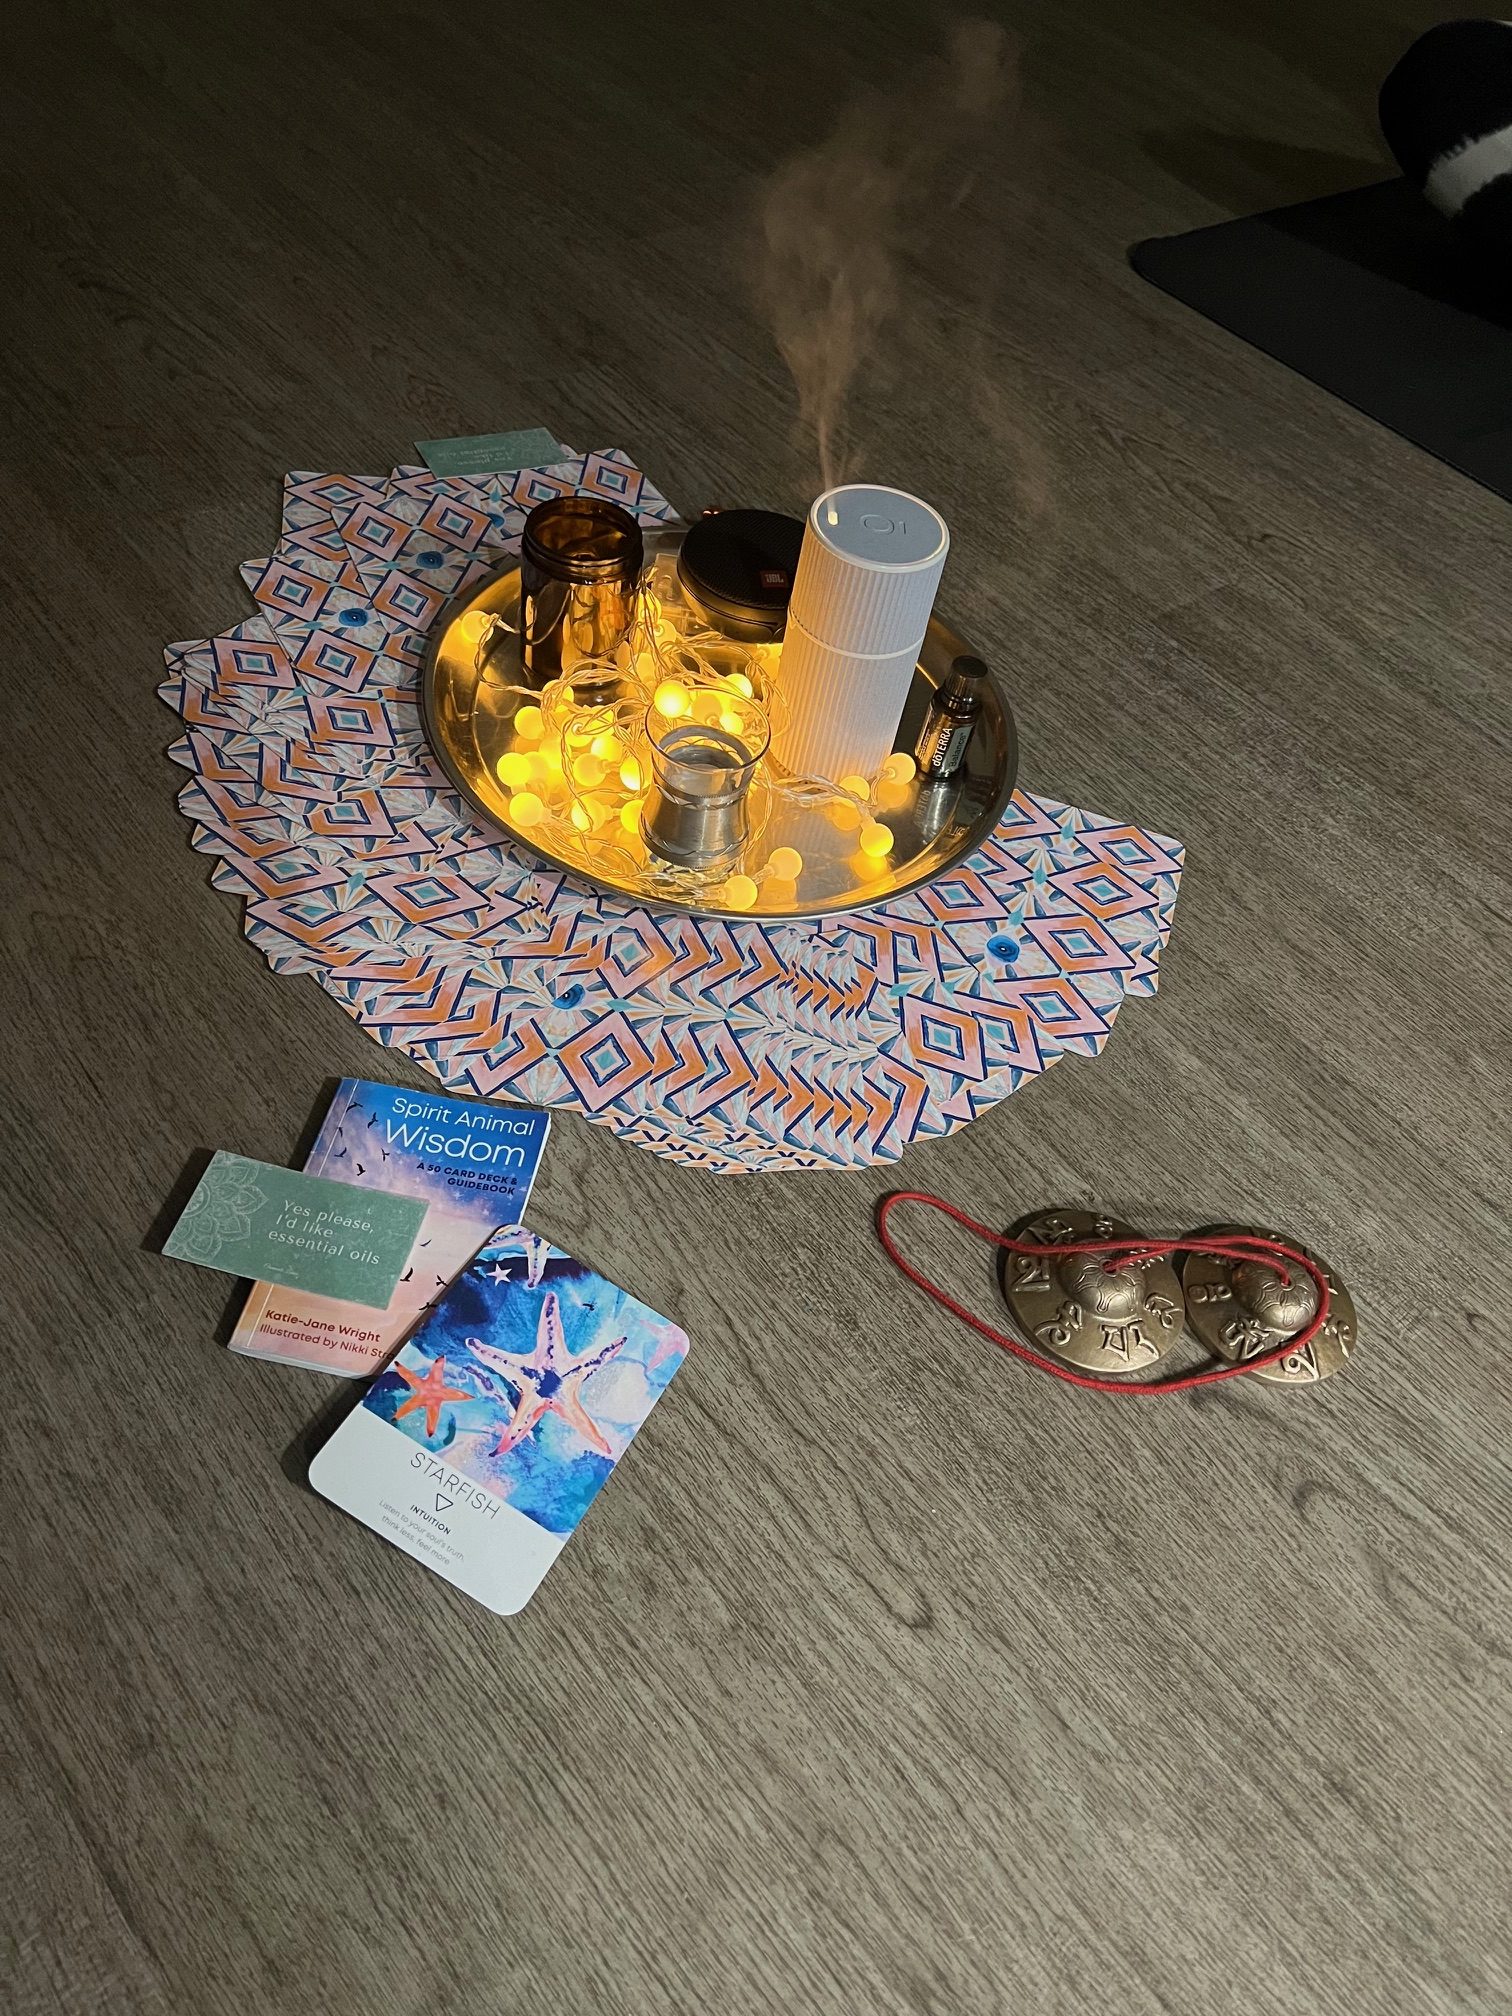 Collection of objects on the floor at a yoga class, representing a focus point: round metal tray contains a string of fairy lights, plus an elecrtic diffuser and candles. Around it is spread a deck of cards, face down. Next to these are a pair of flat bells, plus a selected oracle card and book